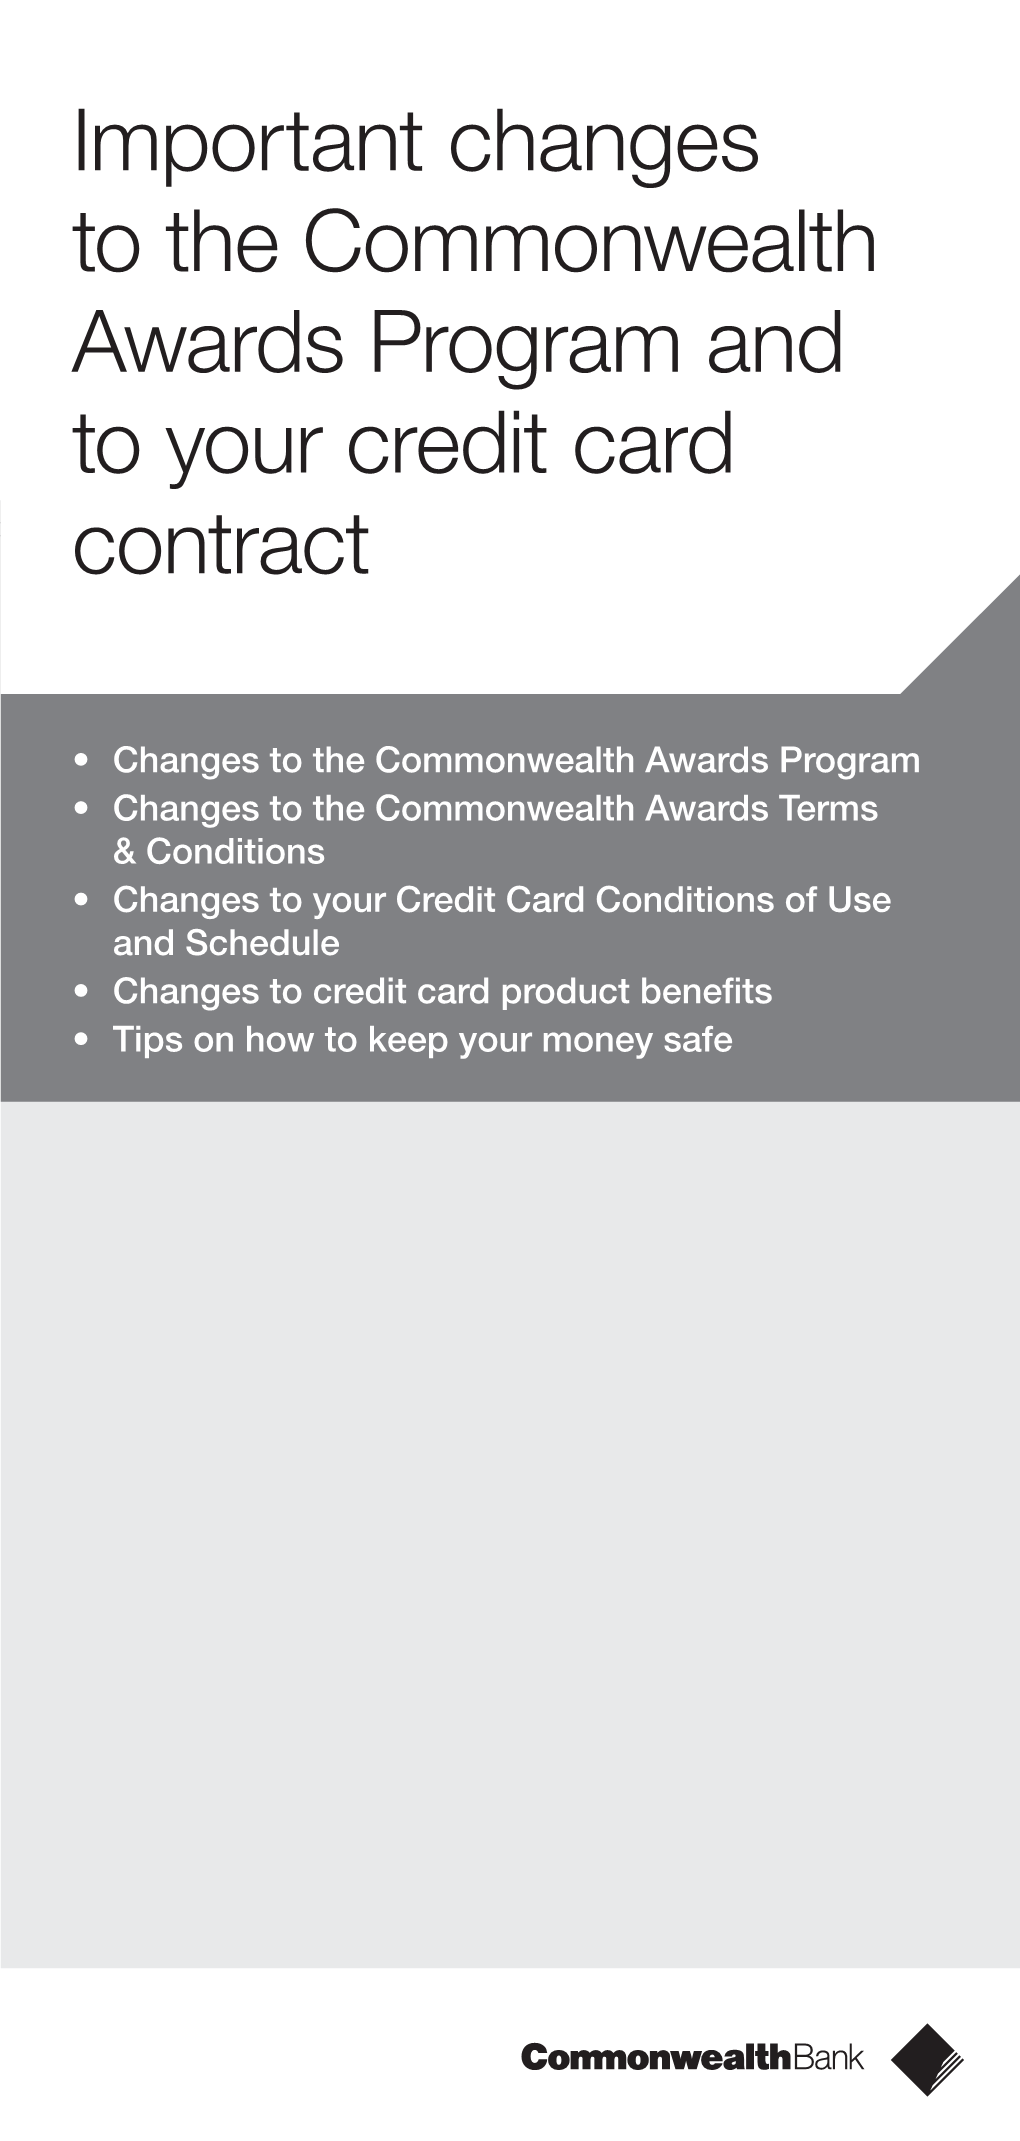 Important Changes to the Commonwealth Awards Program and to Your Credit Card Contract